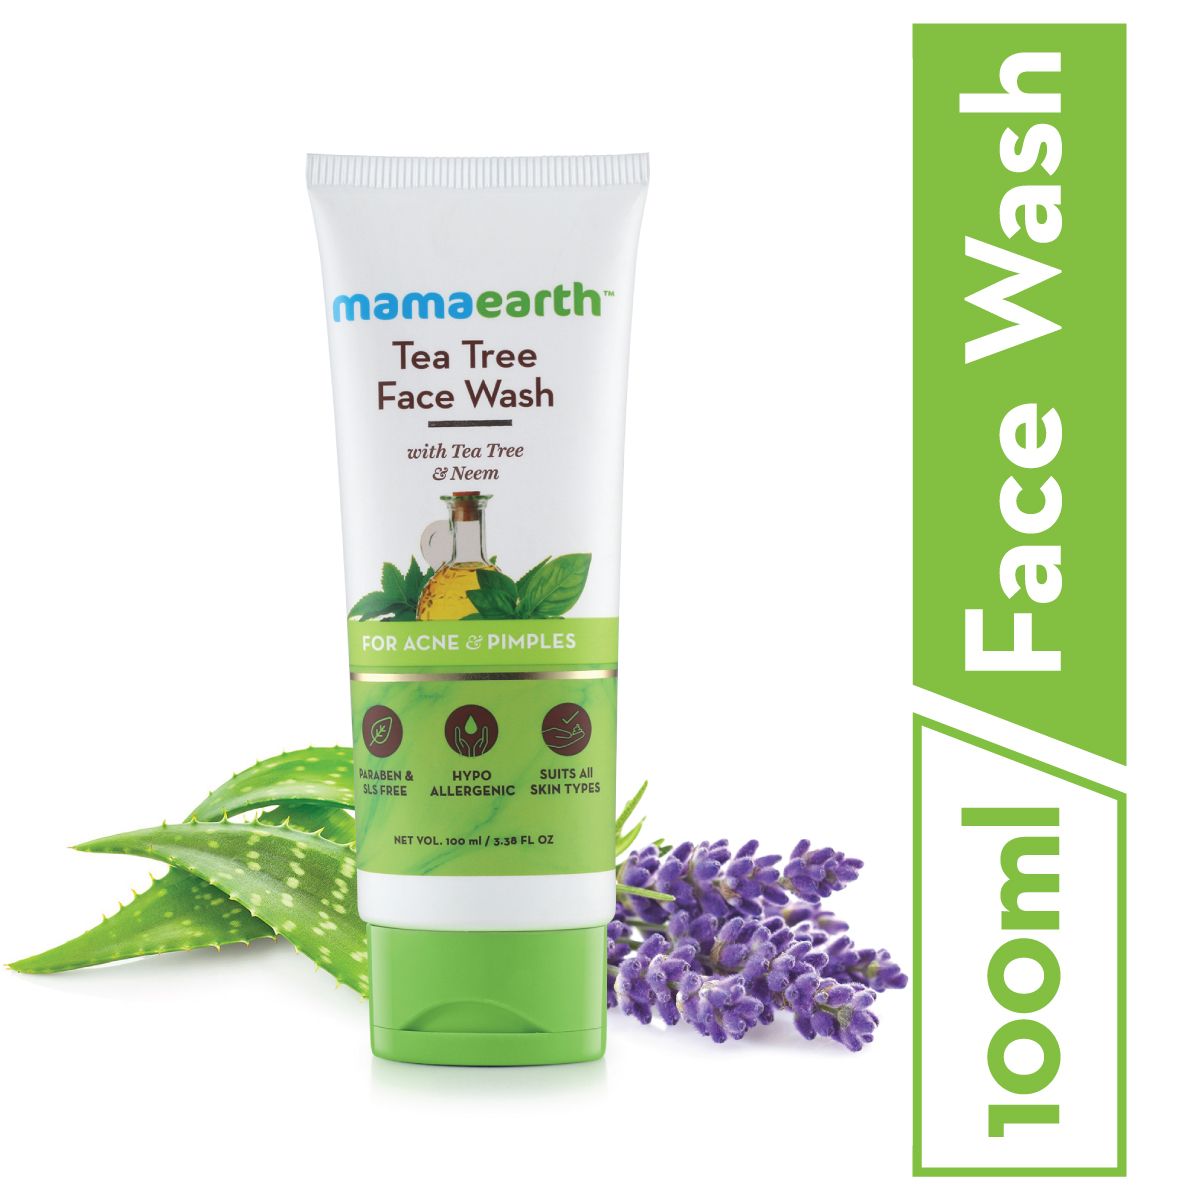 Mamaearth Tea Tree Face Wash Better Than Other Options Available in the Market